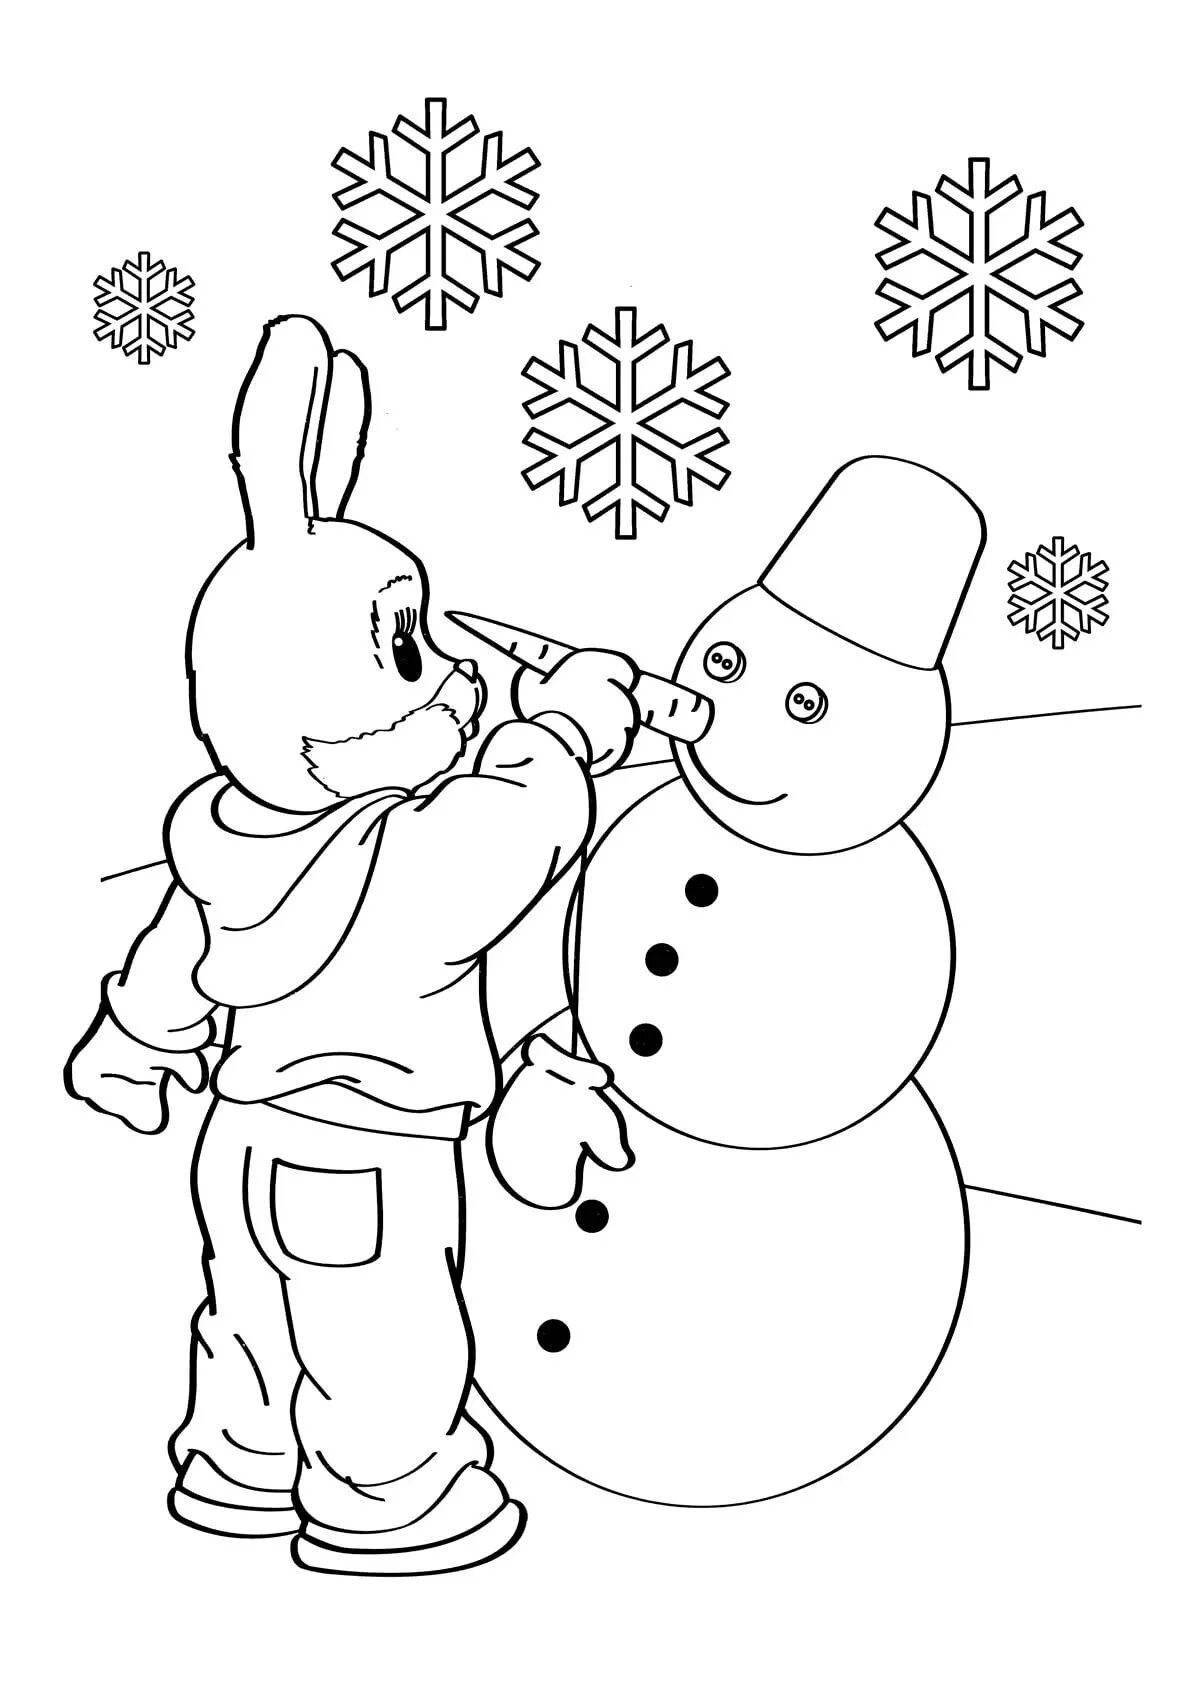 Radiant coloring page for kids winter 2 3 years